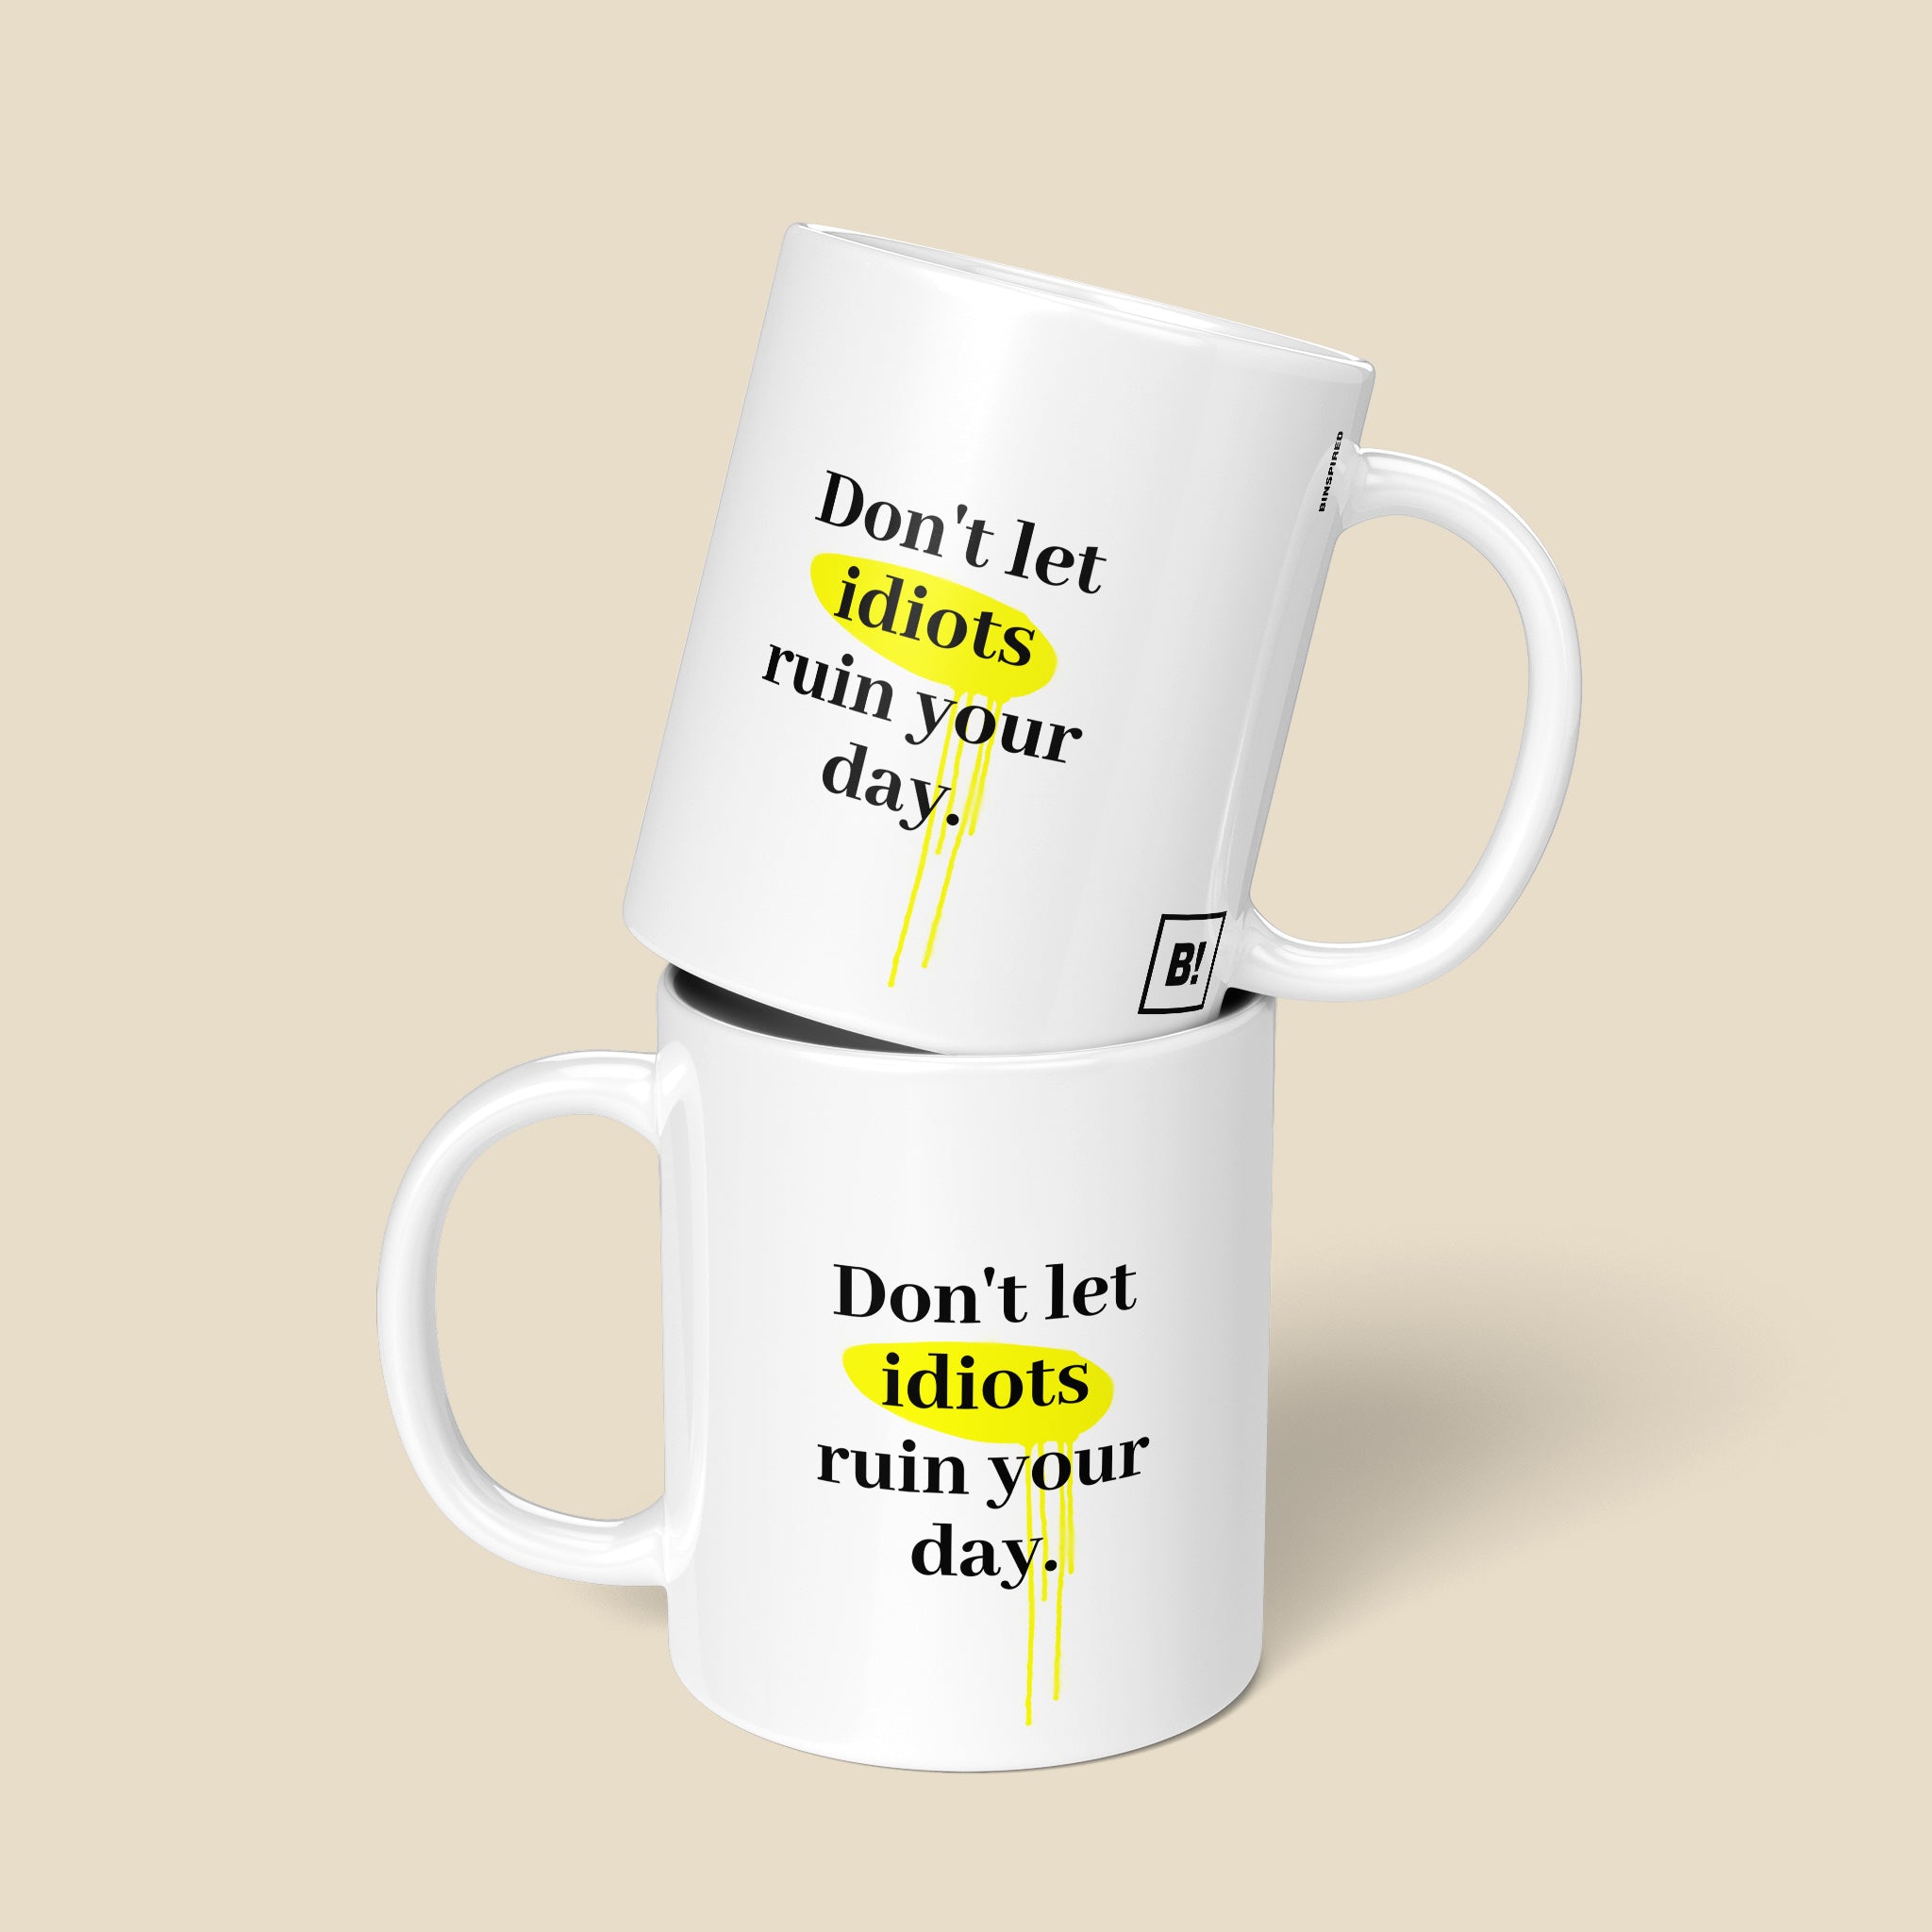 Get inspired by the quote, "Don't let idiots ruin your day" on this 11oz white glossy coffee mug with a front and back view.